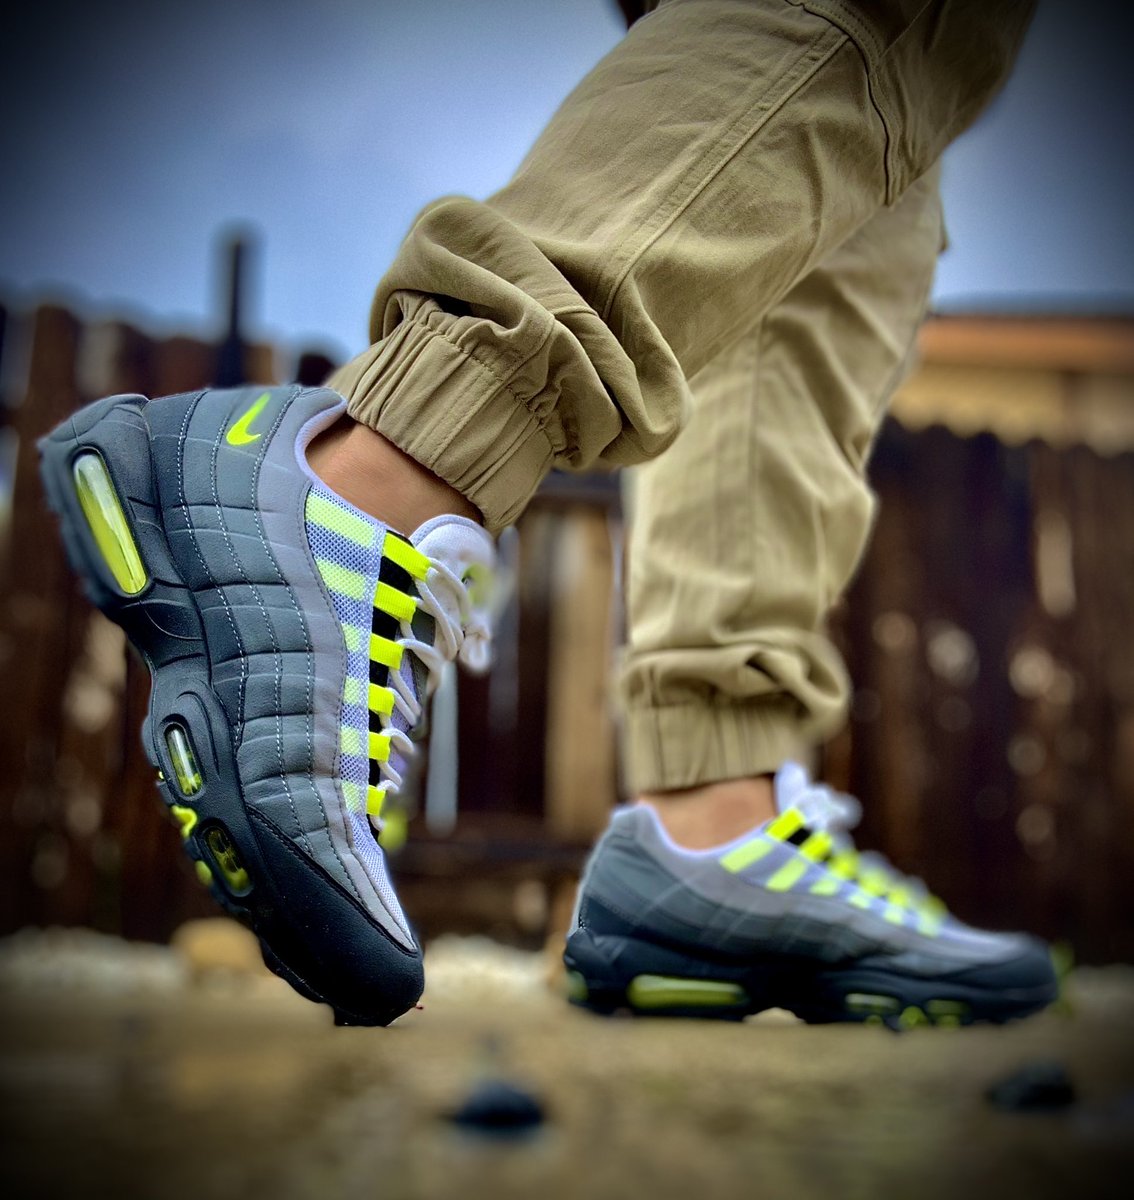 Happy Easter 
Day 31 - End the month with some OGs. Air Max 95’s. #MarchMAXness #KOTD #Nike